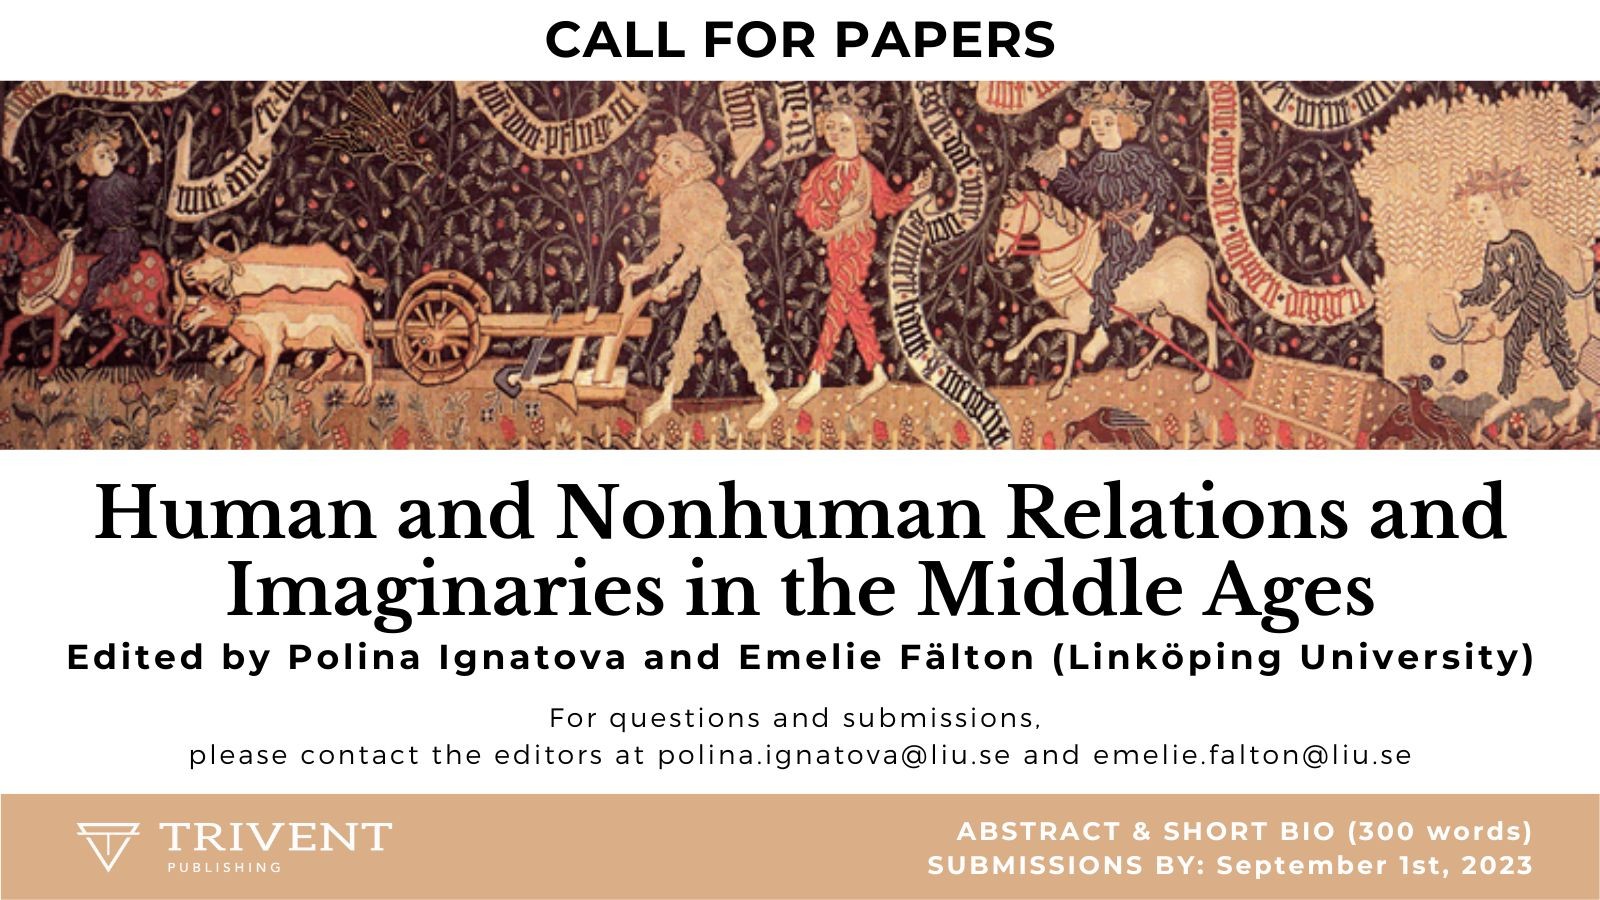 Human and Nonhuman Relations and Imaginaries in the Middle Ages